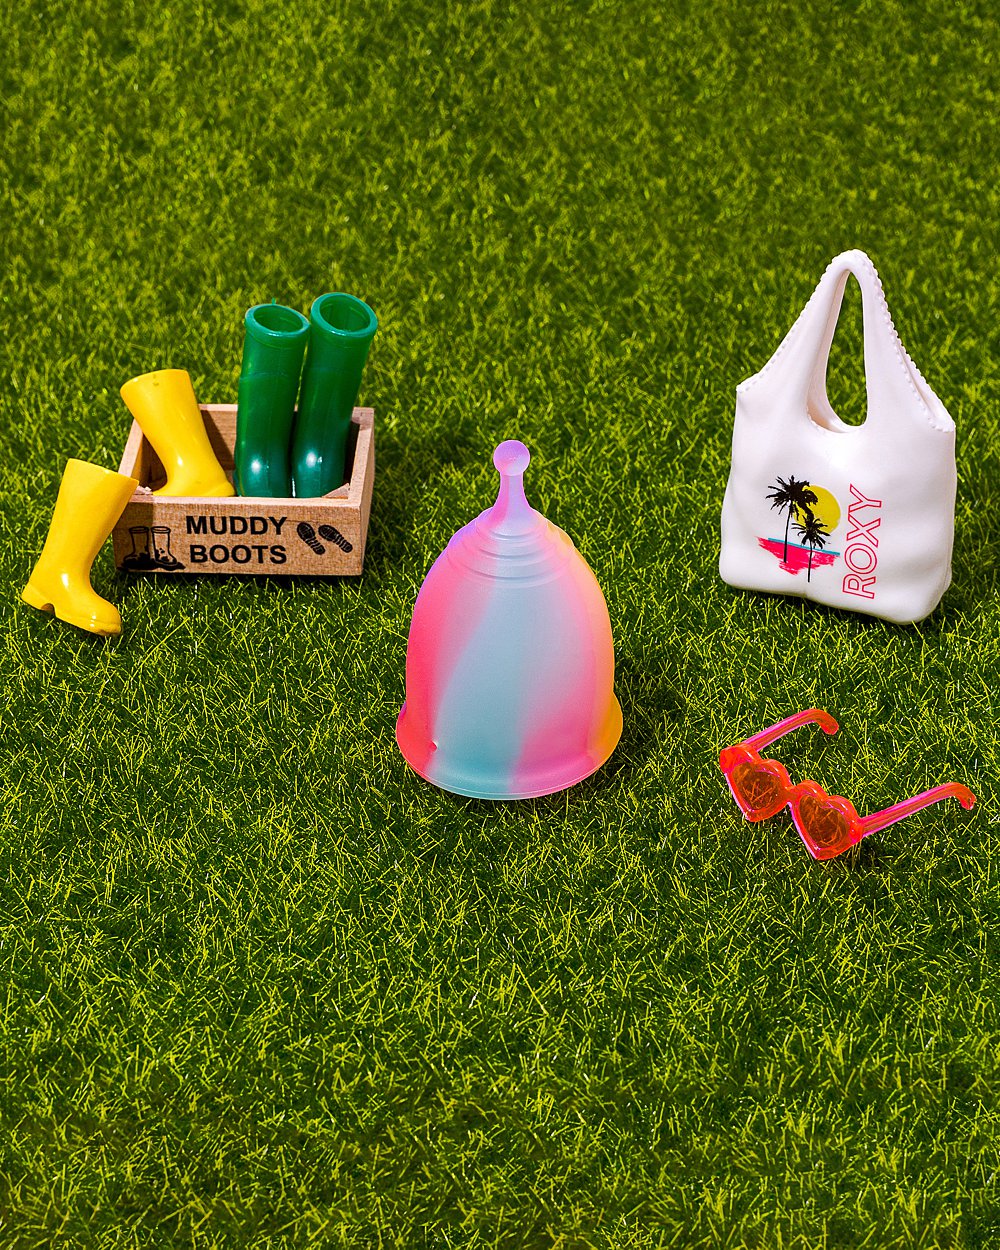 Brightly coloured feminine health product content creation for Pic & Sis menstrual cups. Styled product stills photography by Marianne Taylor.